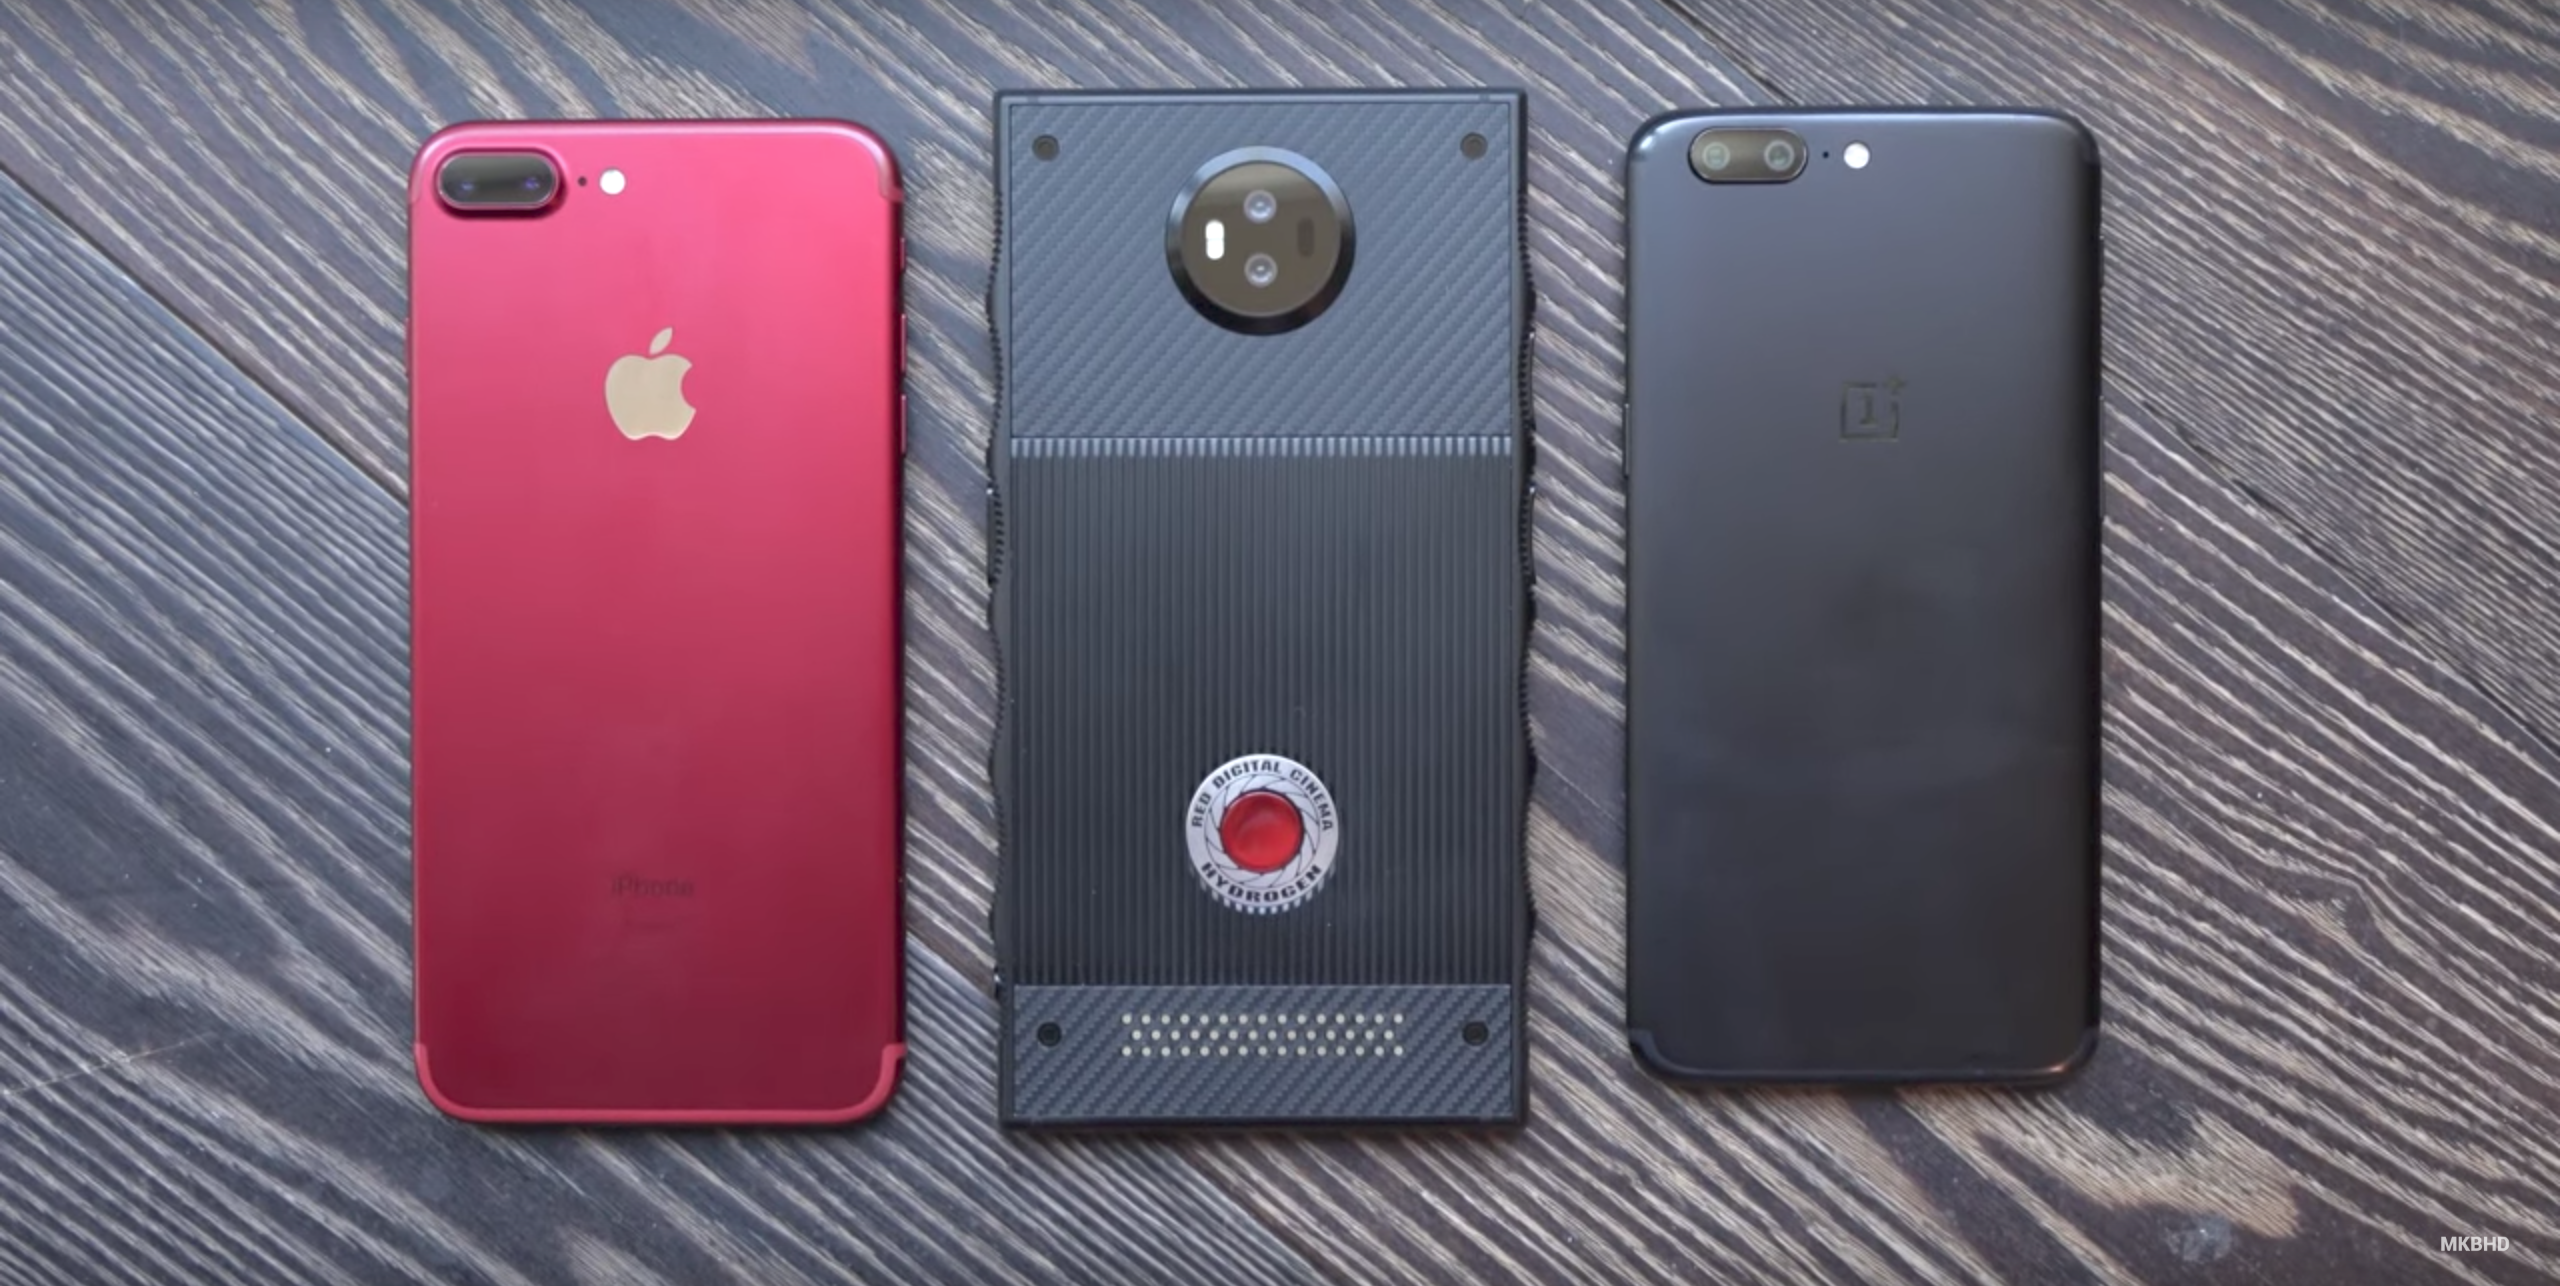 RED Hydrogen One Smartphone: First Look | Fortune